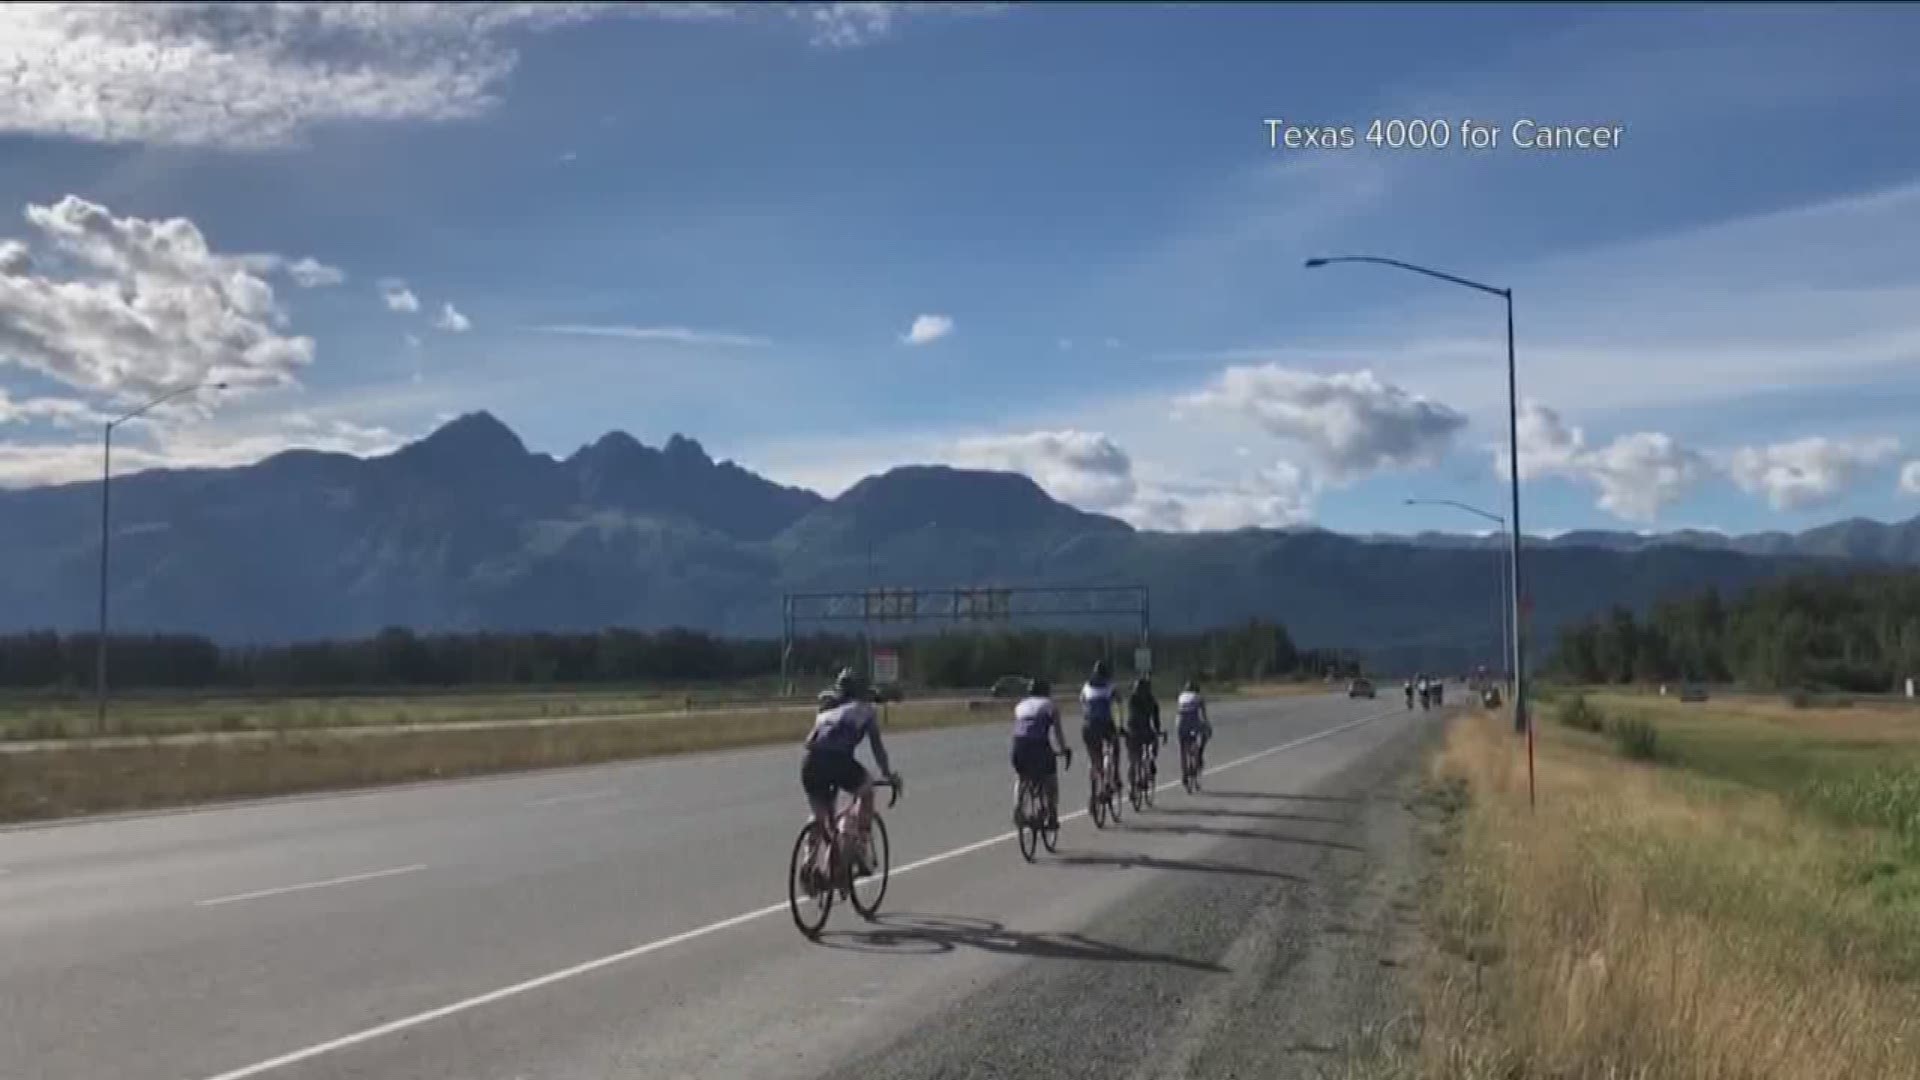 Starting on Friday, the University of Texas student team of Texas 4,000 for Cancer will bike from Austin to Anchorage, Alaska, lasting more than 70 days. It’s all to raise hope and deliver grants in the fight against cancer. Rider Annie Velasco joined KVUE to talk about the trip and organization.